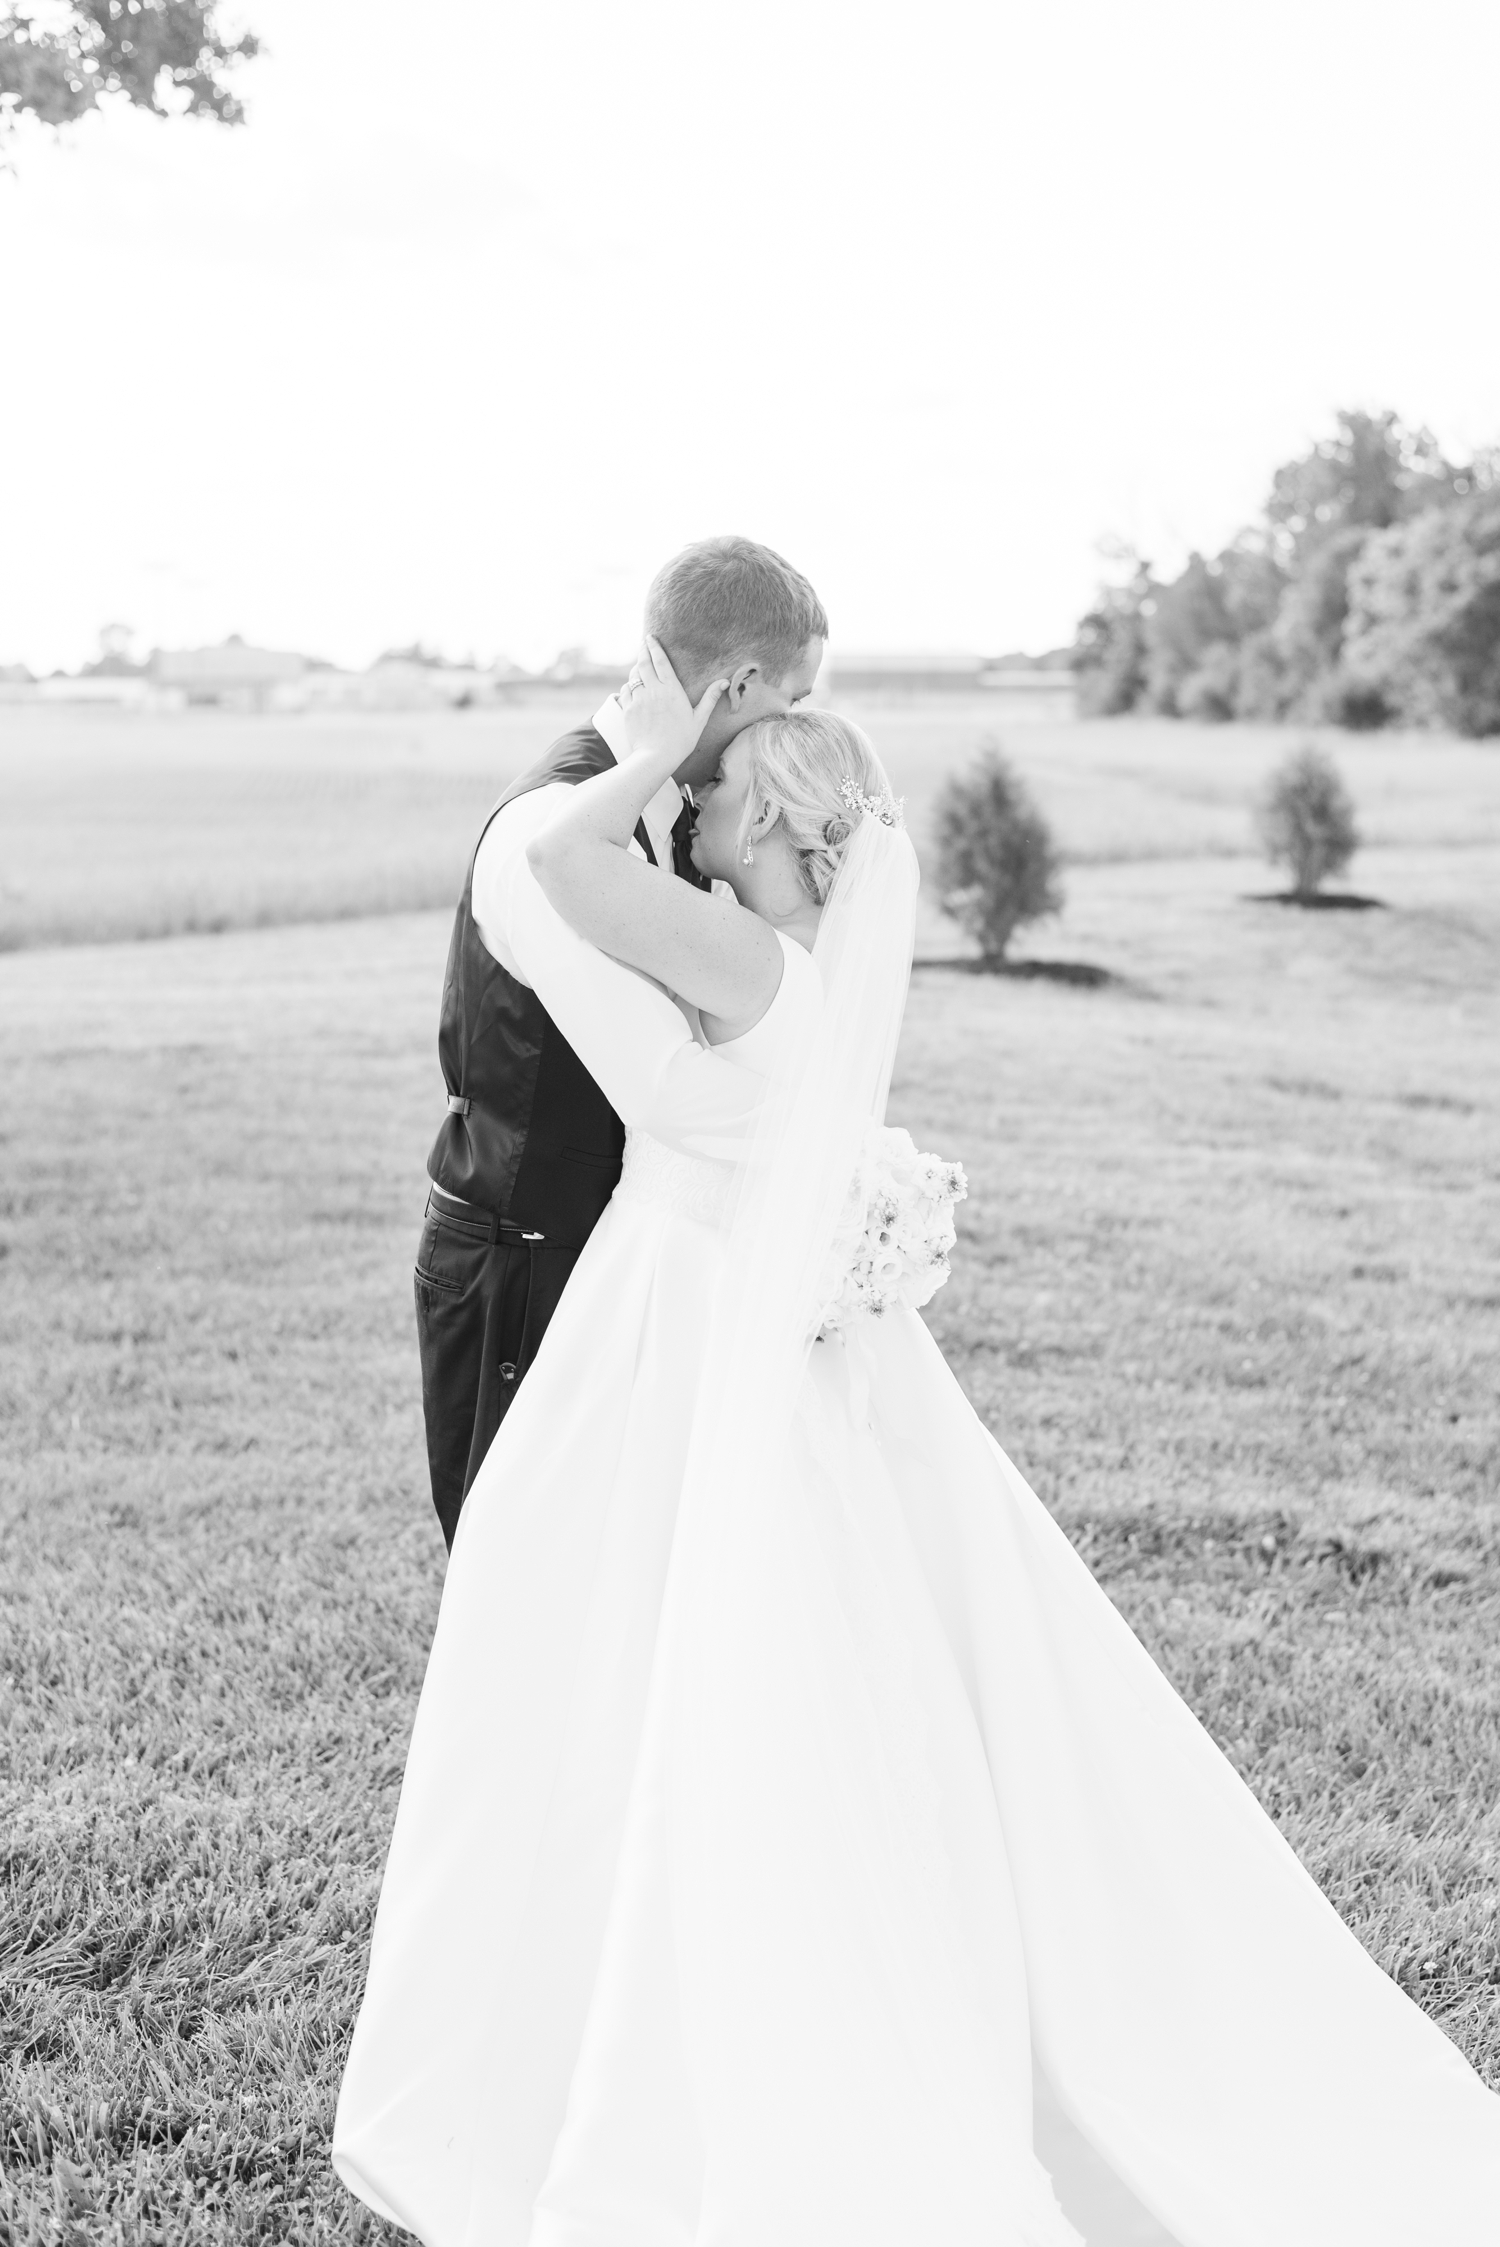 black and white bride and groom portraits willow tree Indianapolis Indiana wedding by Courtney Rudicel wedding photographer in Indiana